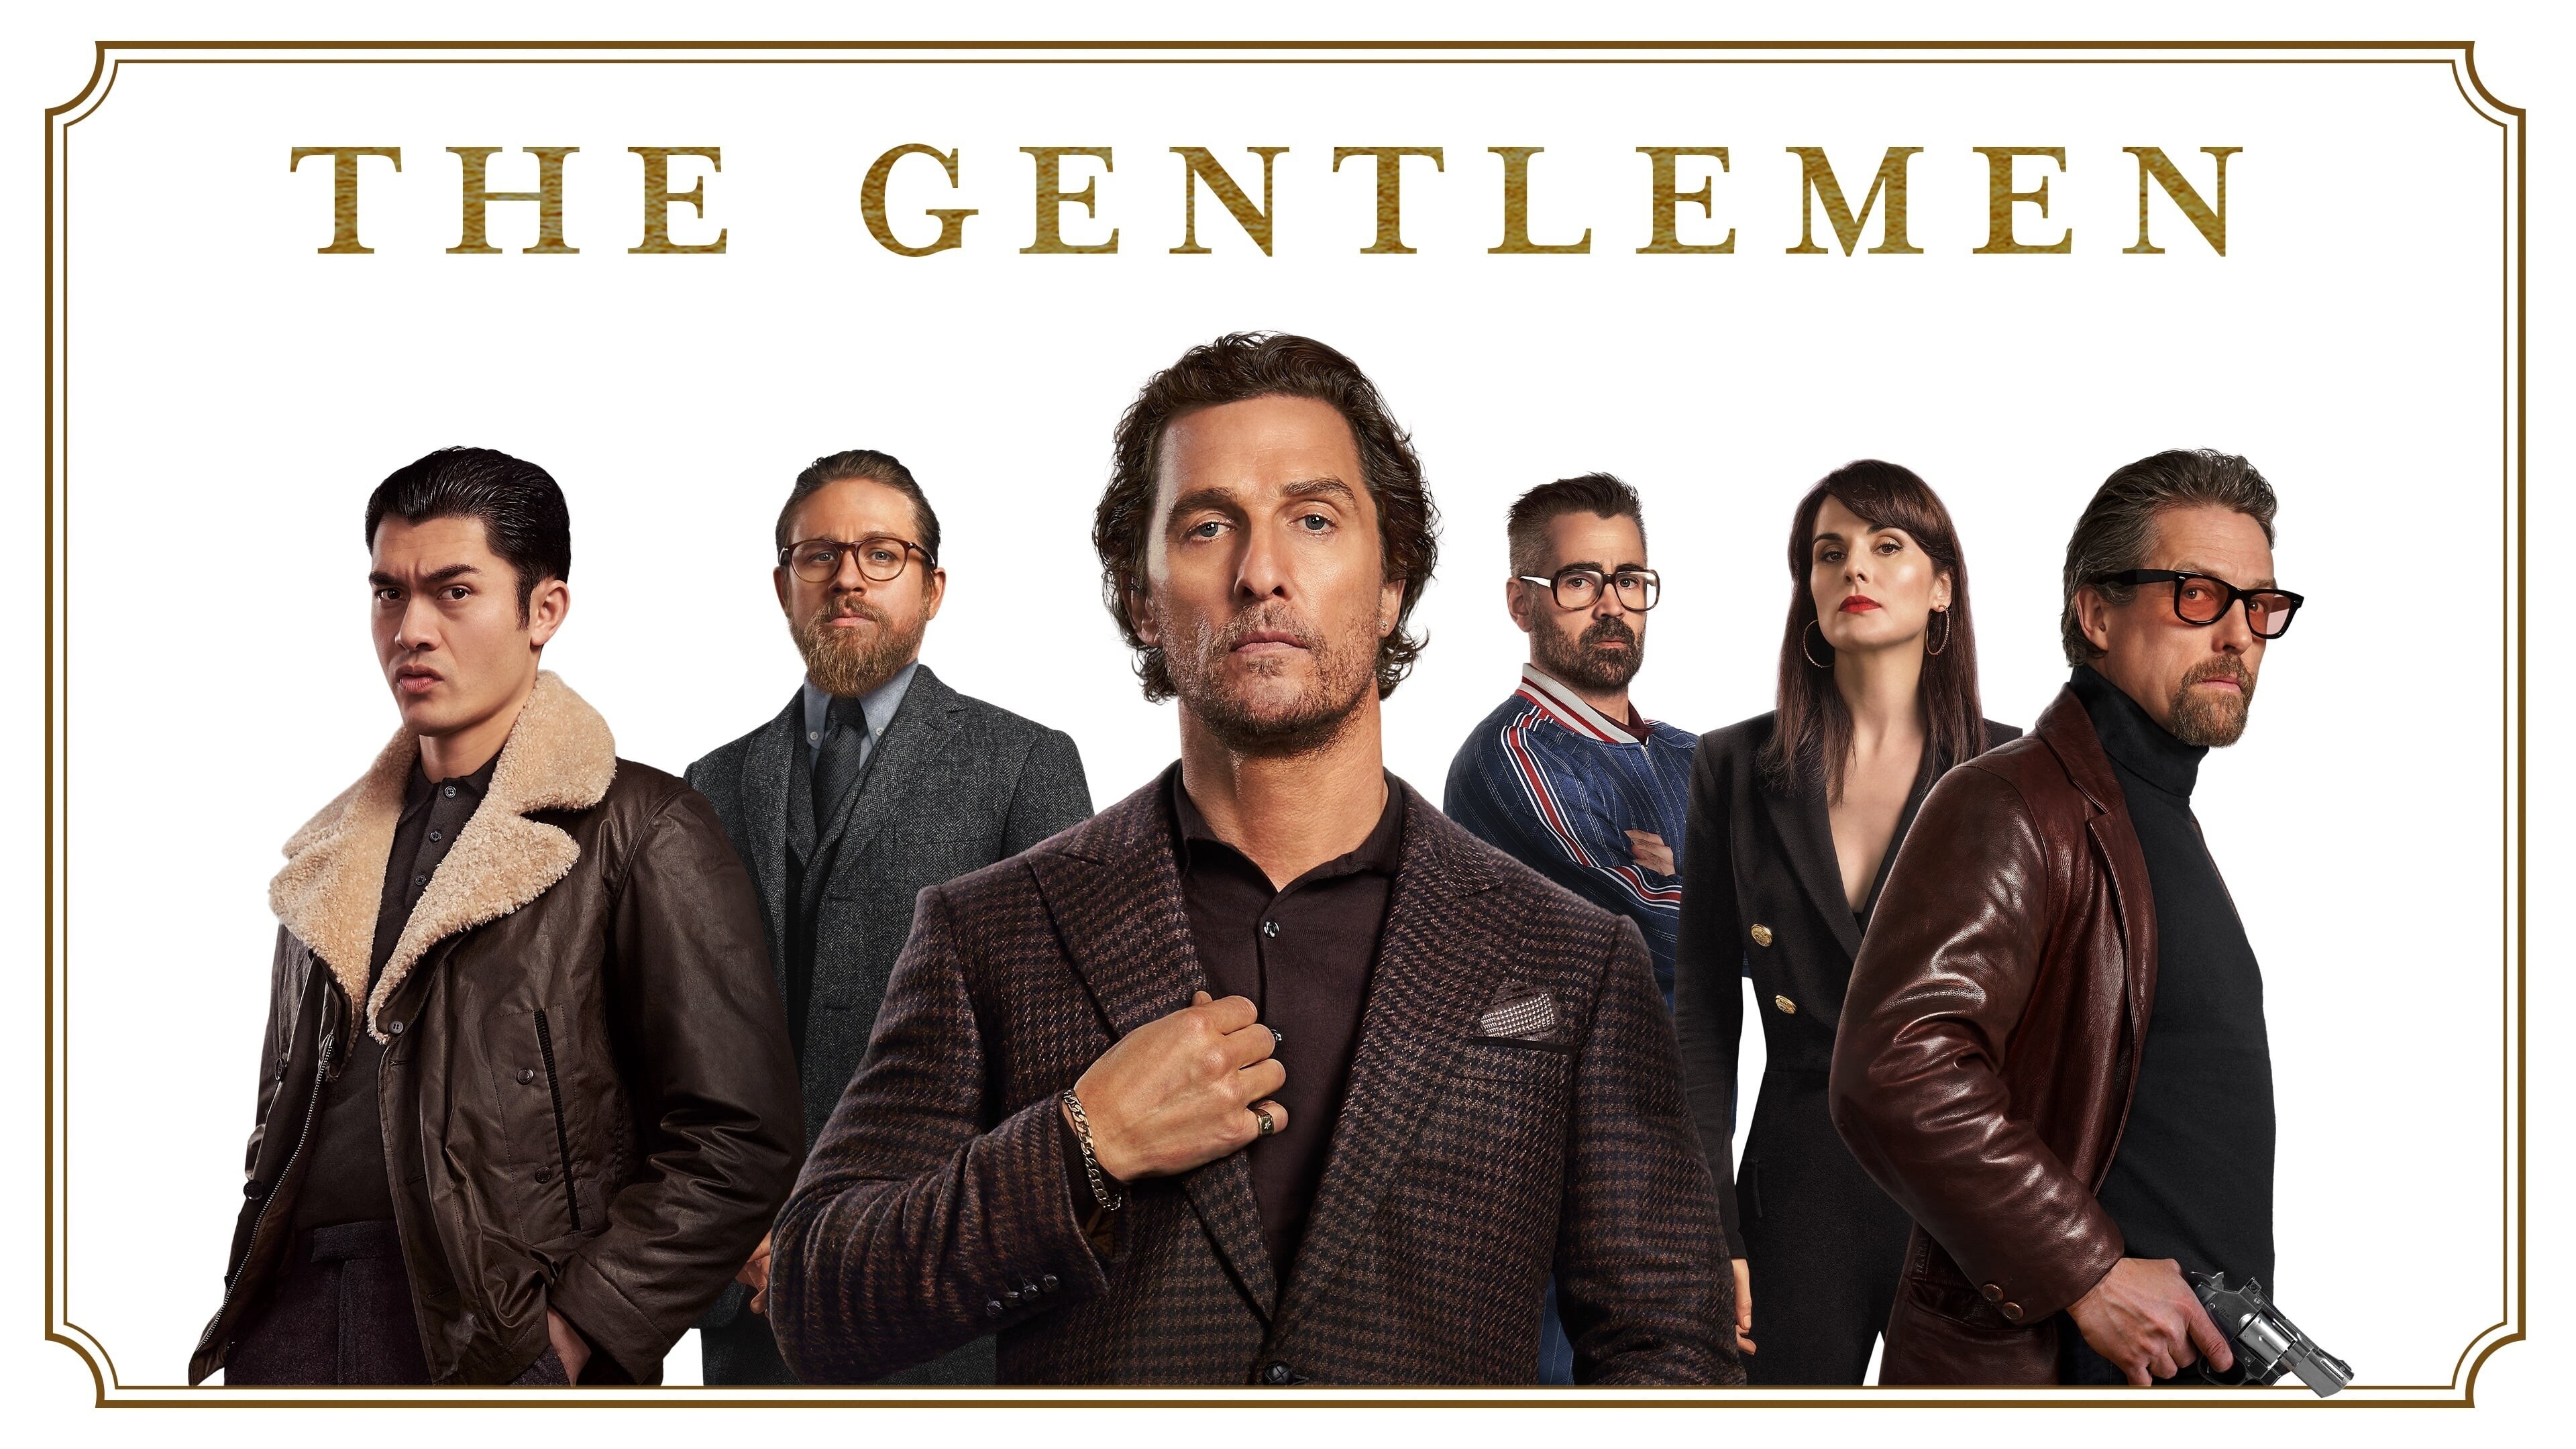 Gentleman: A 2019 action comedy film written directed and produced by Guy Ritchie, Matthew McConaughey. 3840x2160 4K Wallpaper.